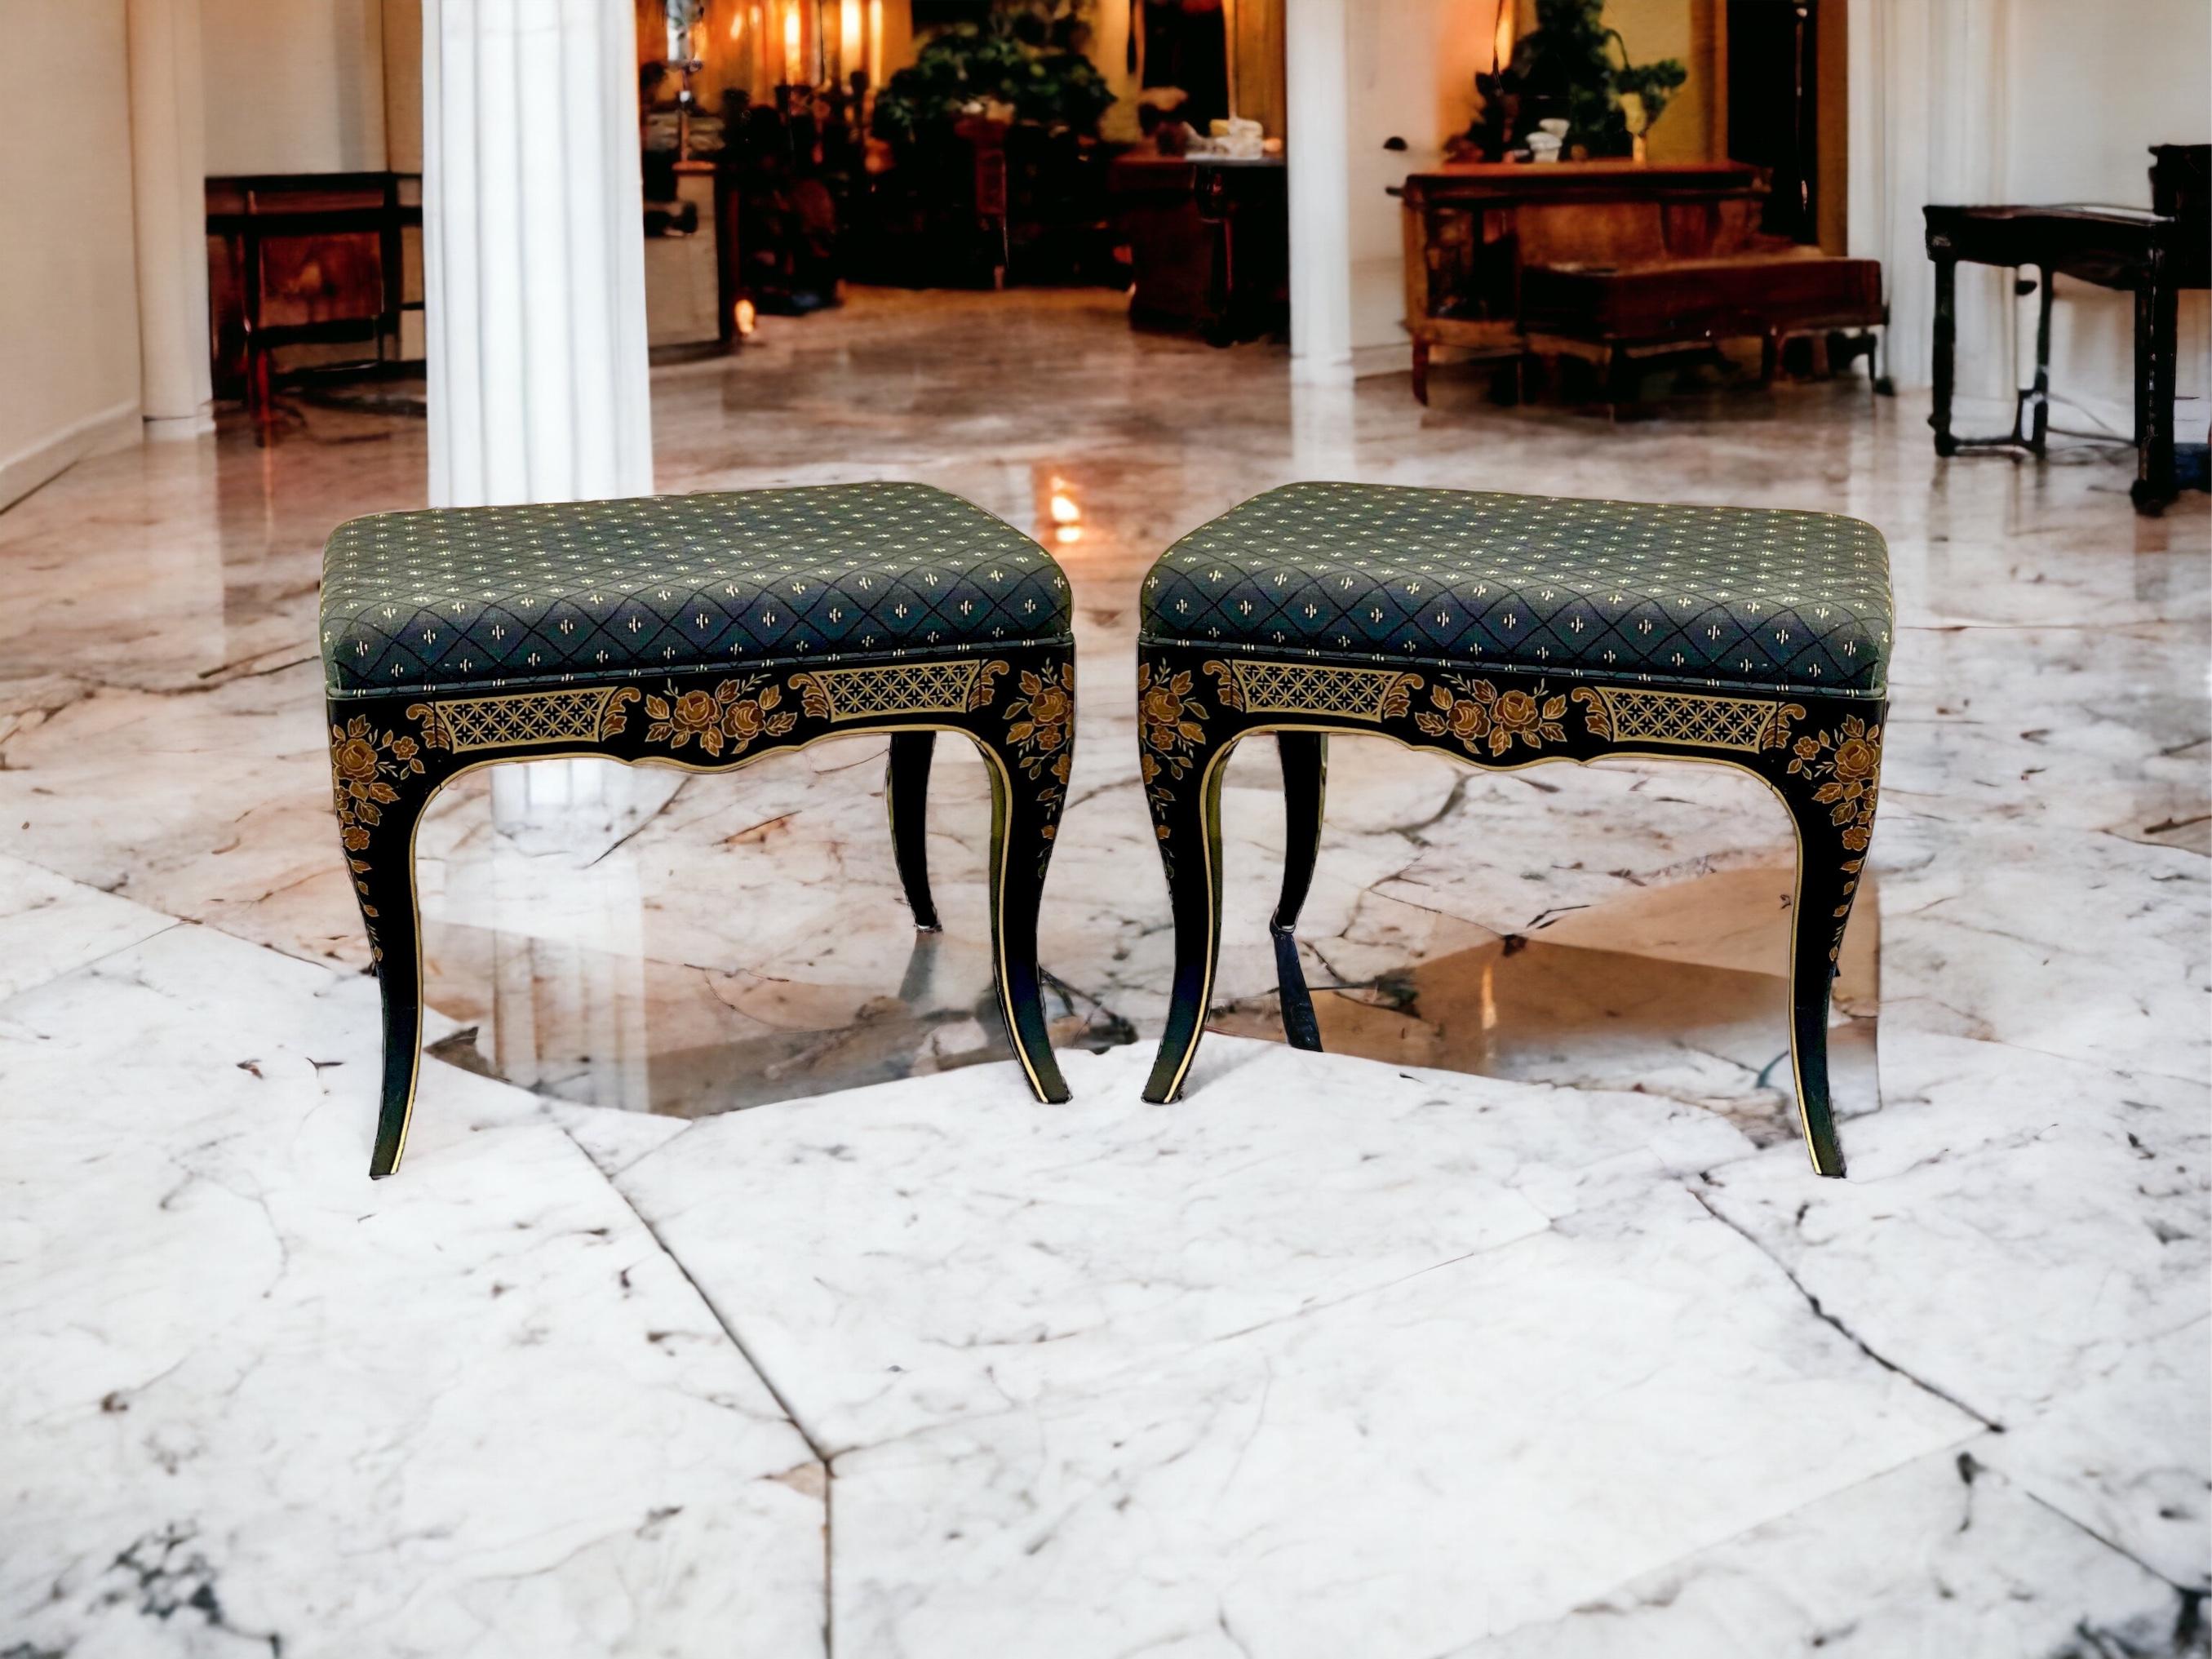 This is a classic pair of black lacquer painted chinoiserie ottomans dating approximately to the 1980s. The upholstery is vintage and shows light wear. They are American. add 